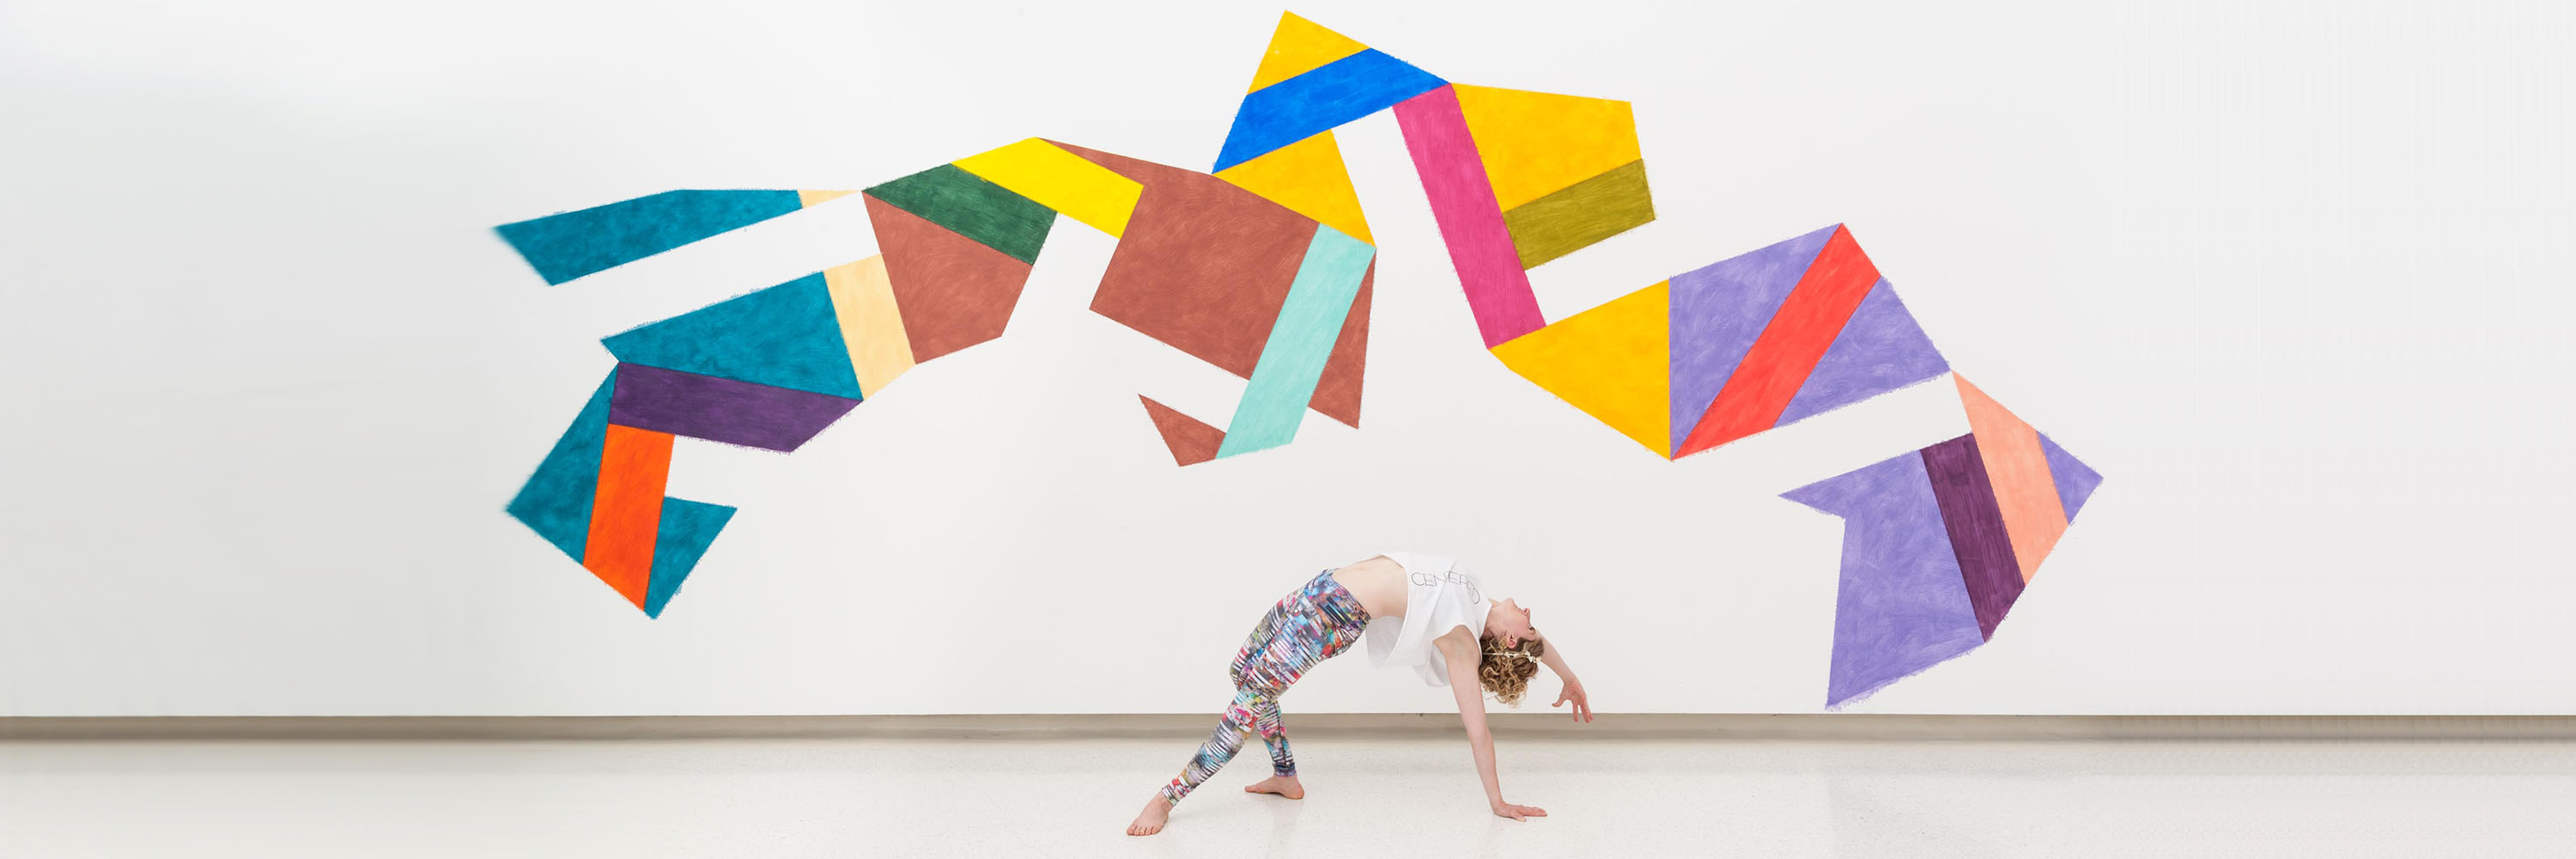 A woman doing a wheel pose in front of a colorful geometric artwork on a white wall.